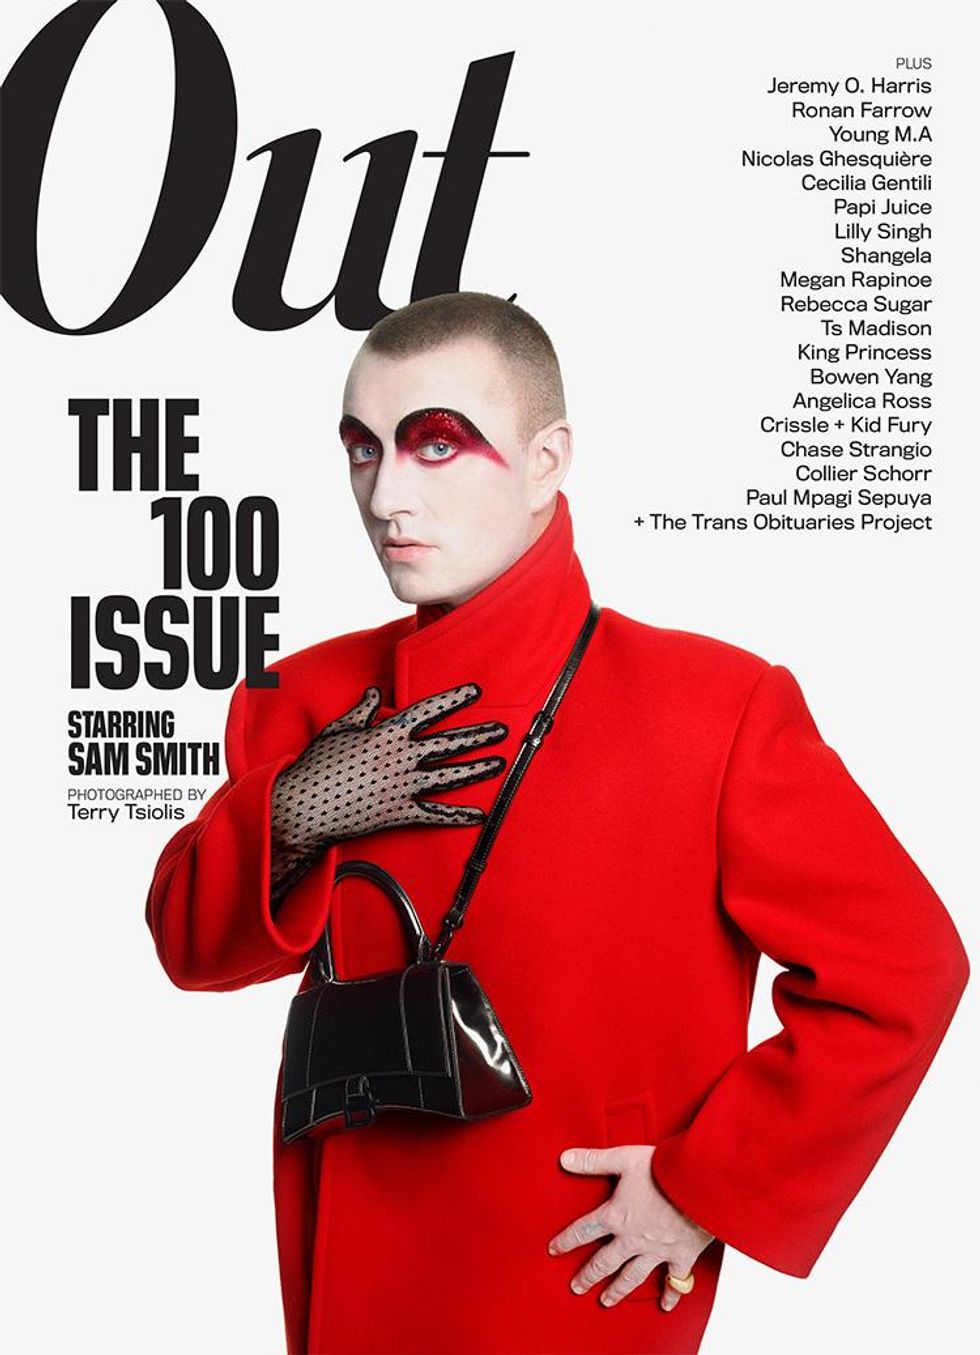 Sam Smith Rolling Stone Cover